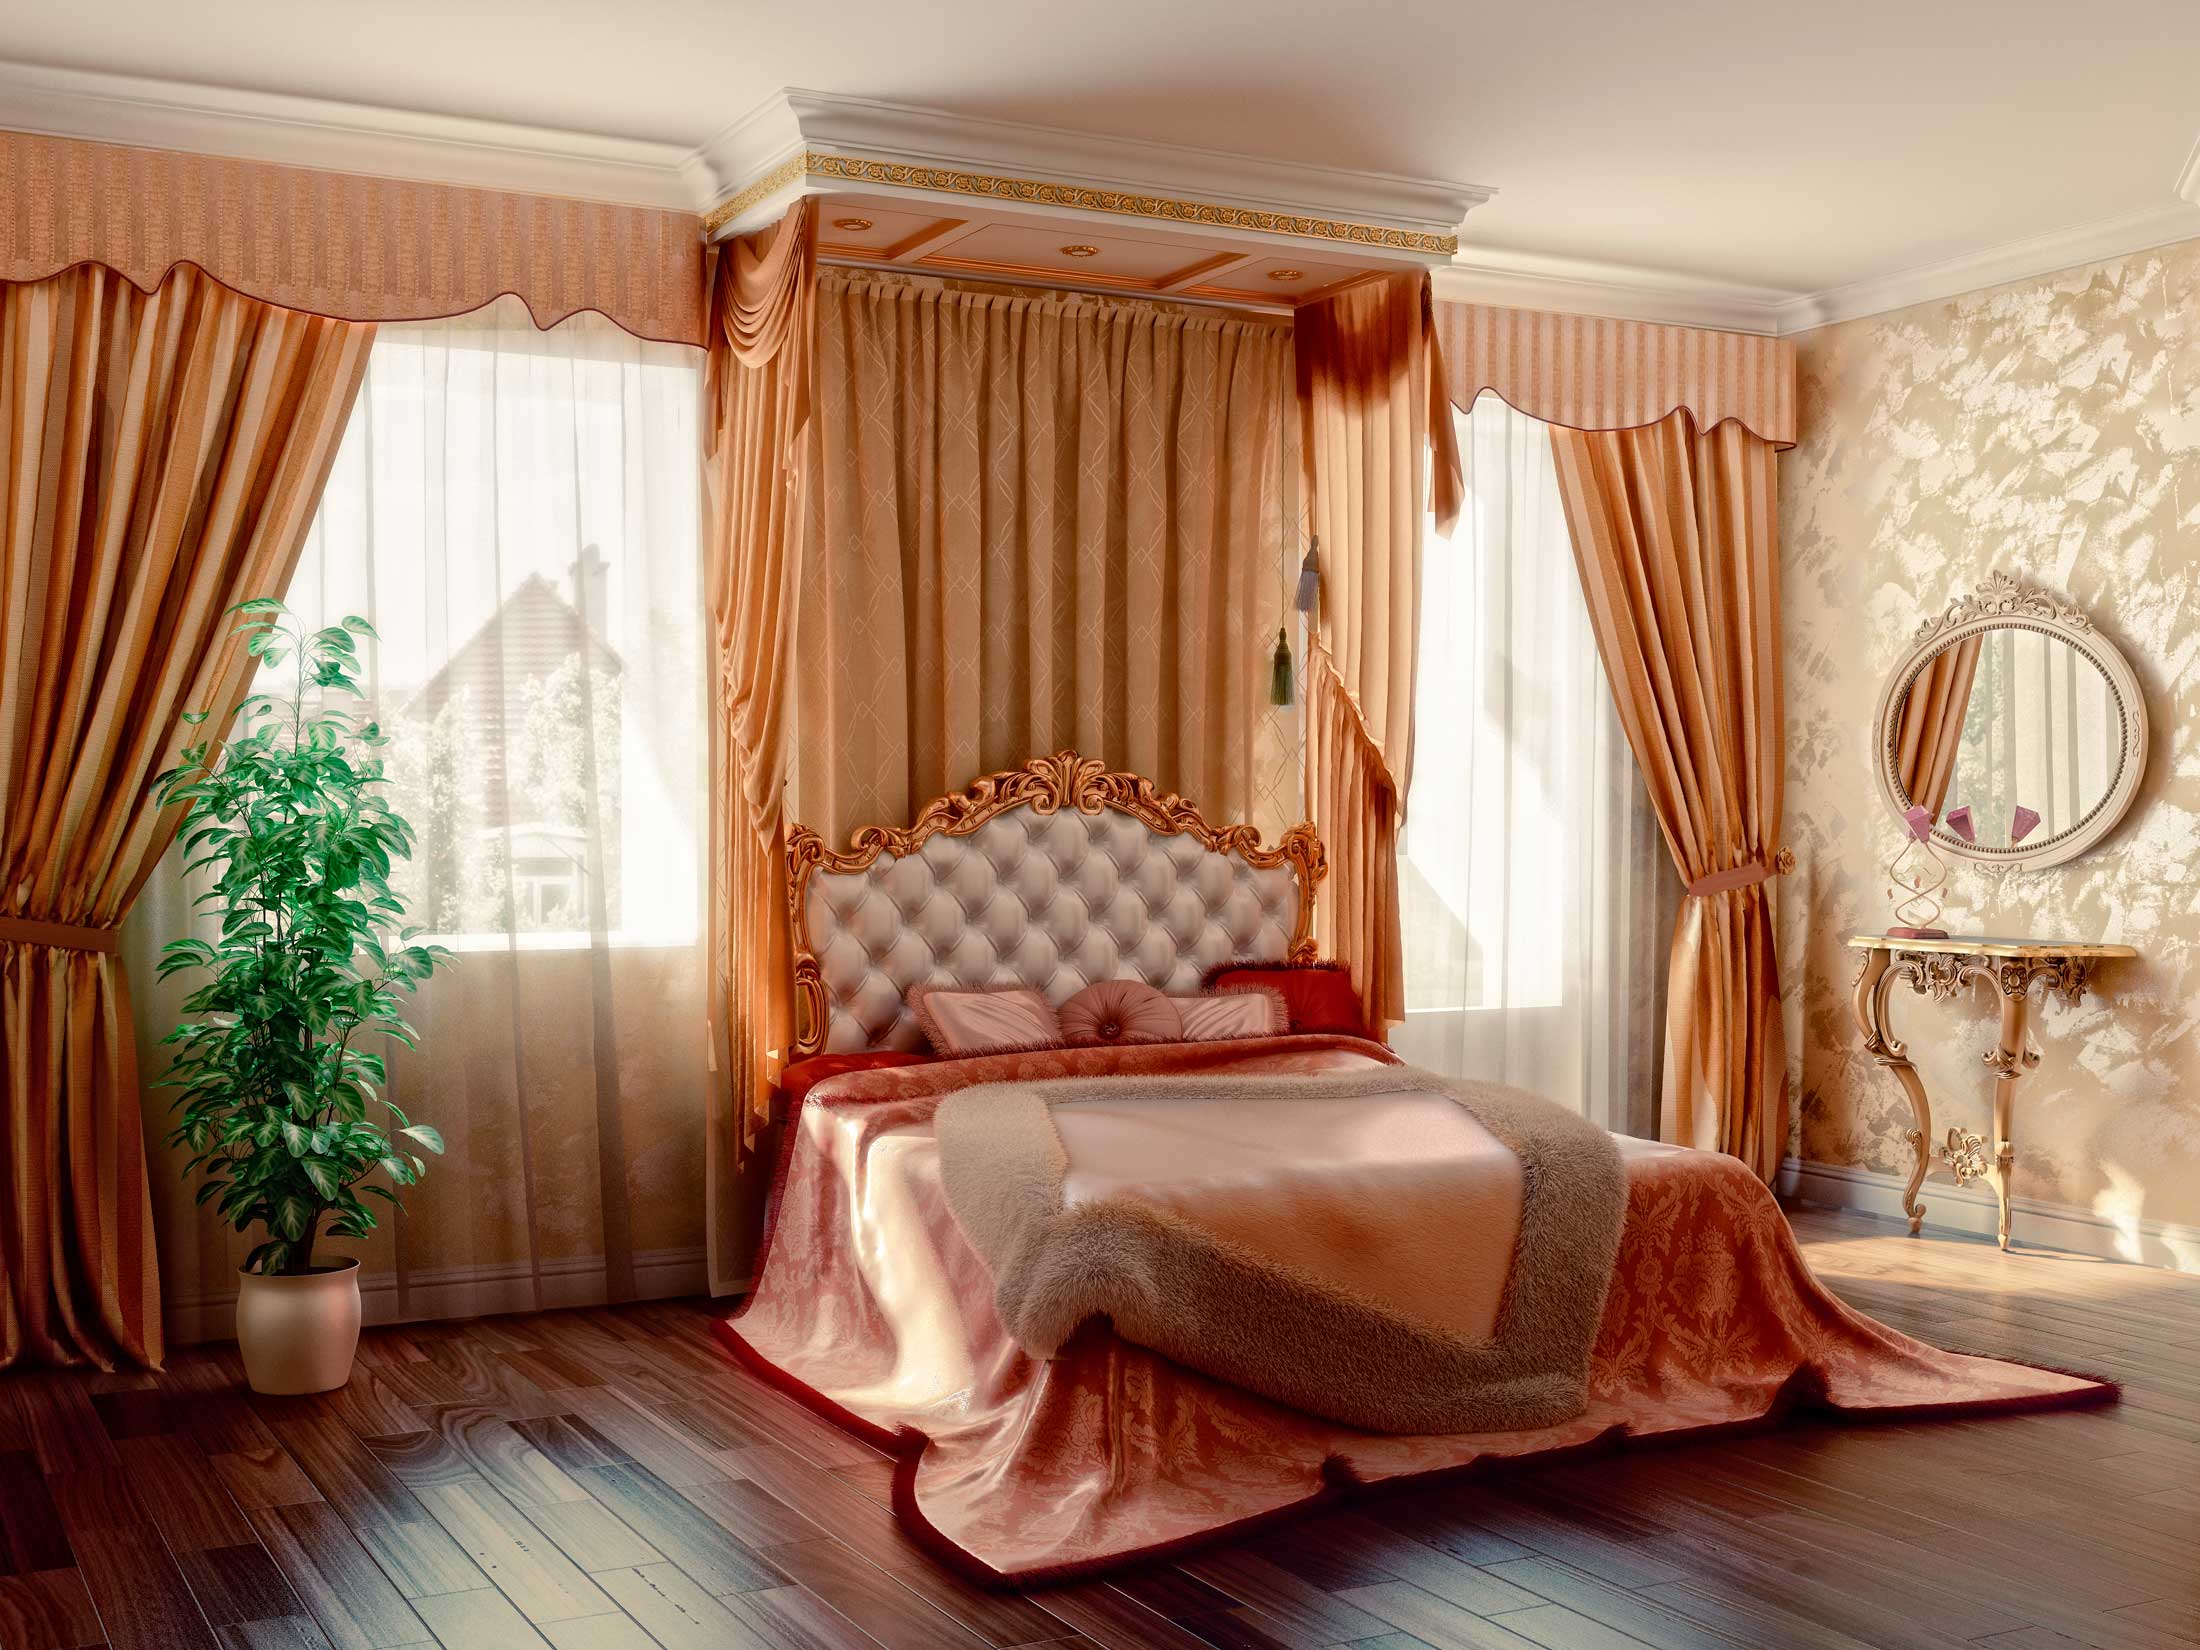 Bedroom with wood floor and draperies